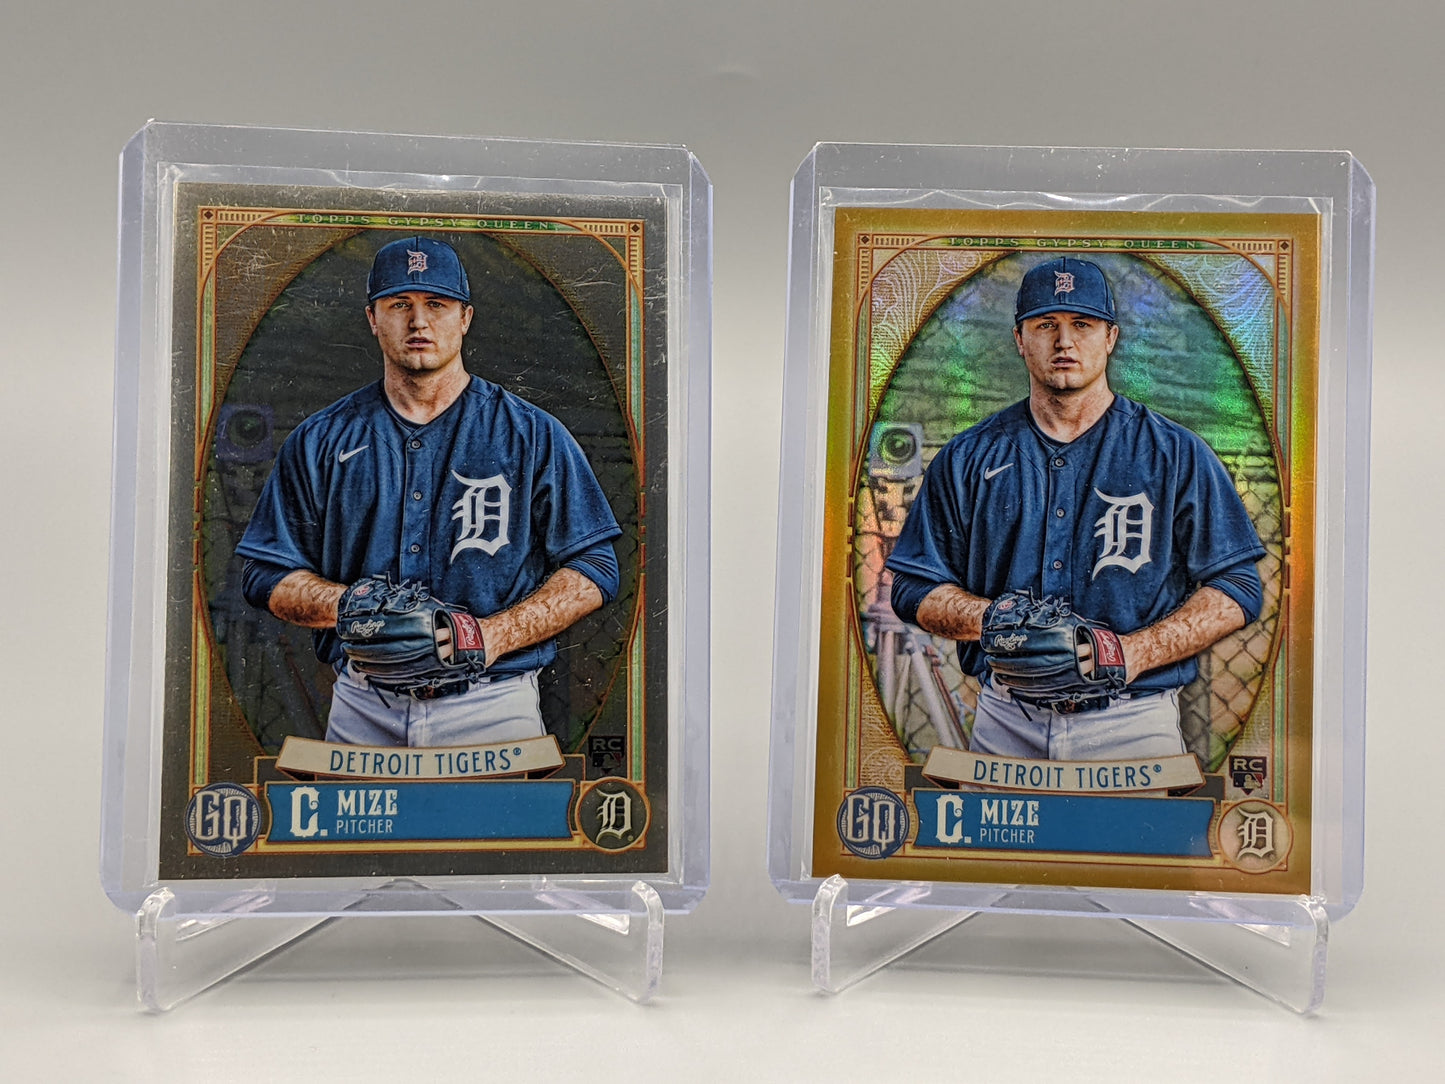 2021 Topps Gypsy Queen Chrome Gold Lot #149 Casey Mize RC (2 cards) Tigers